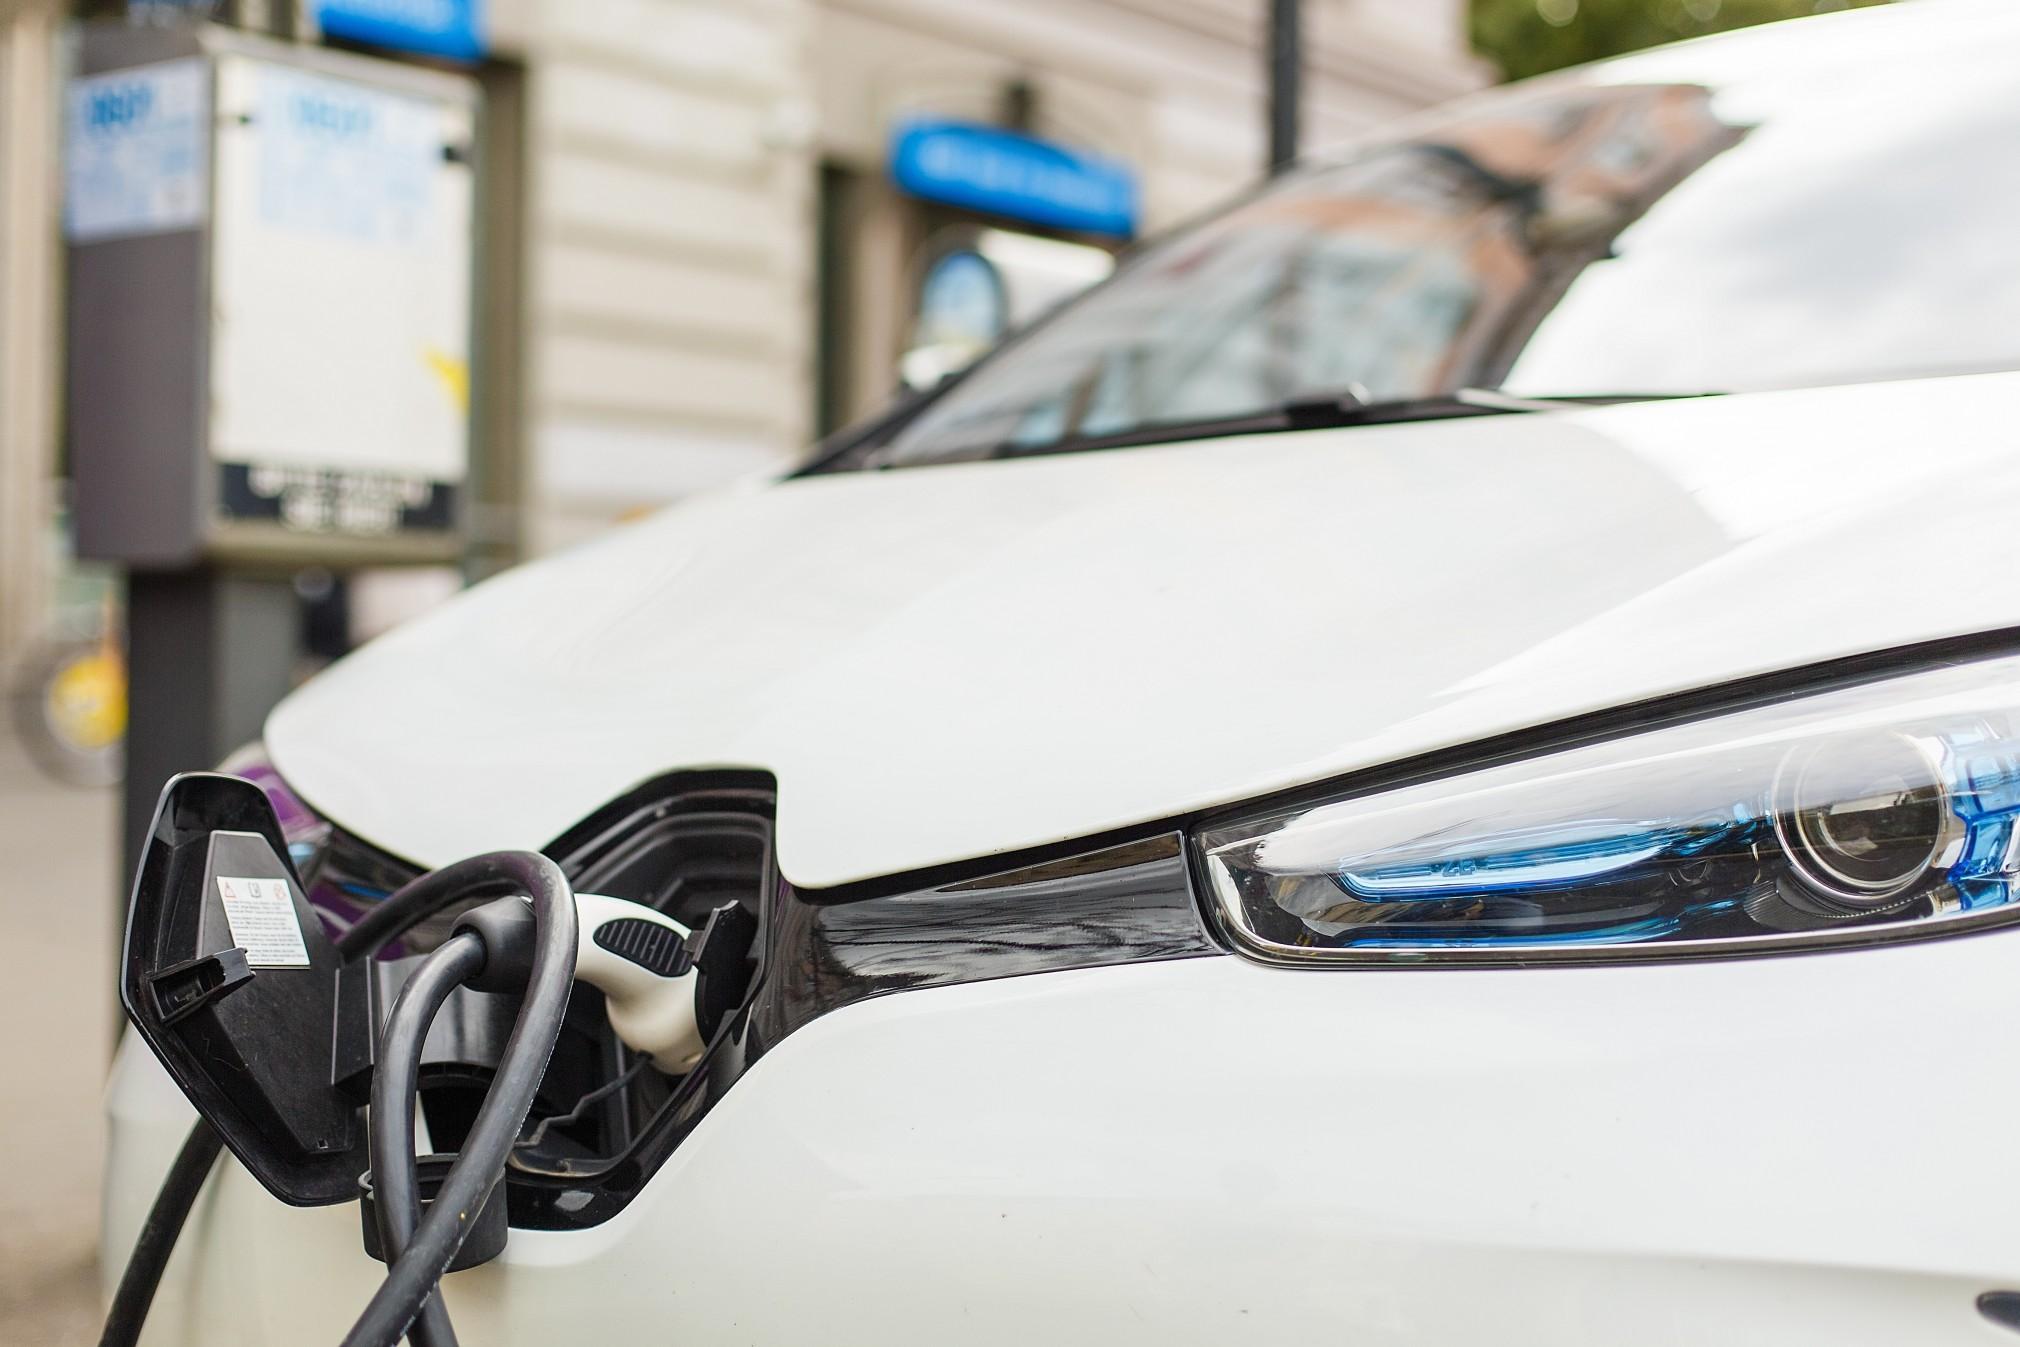 Electric vehicles are becoming more popular much faster than previously expected